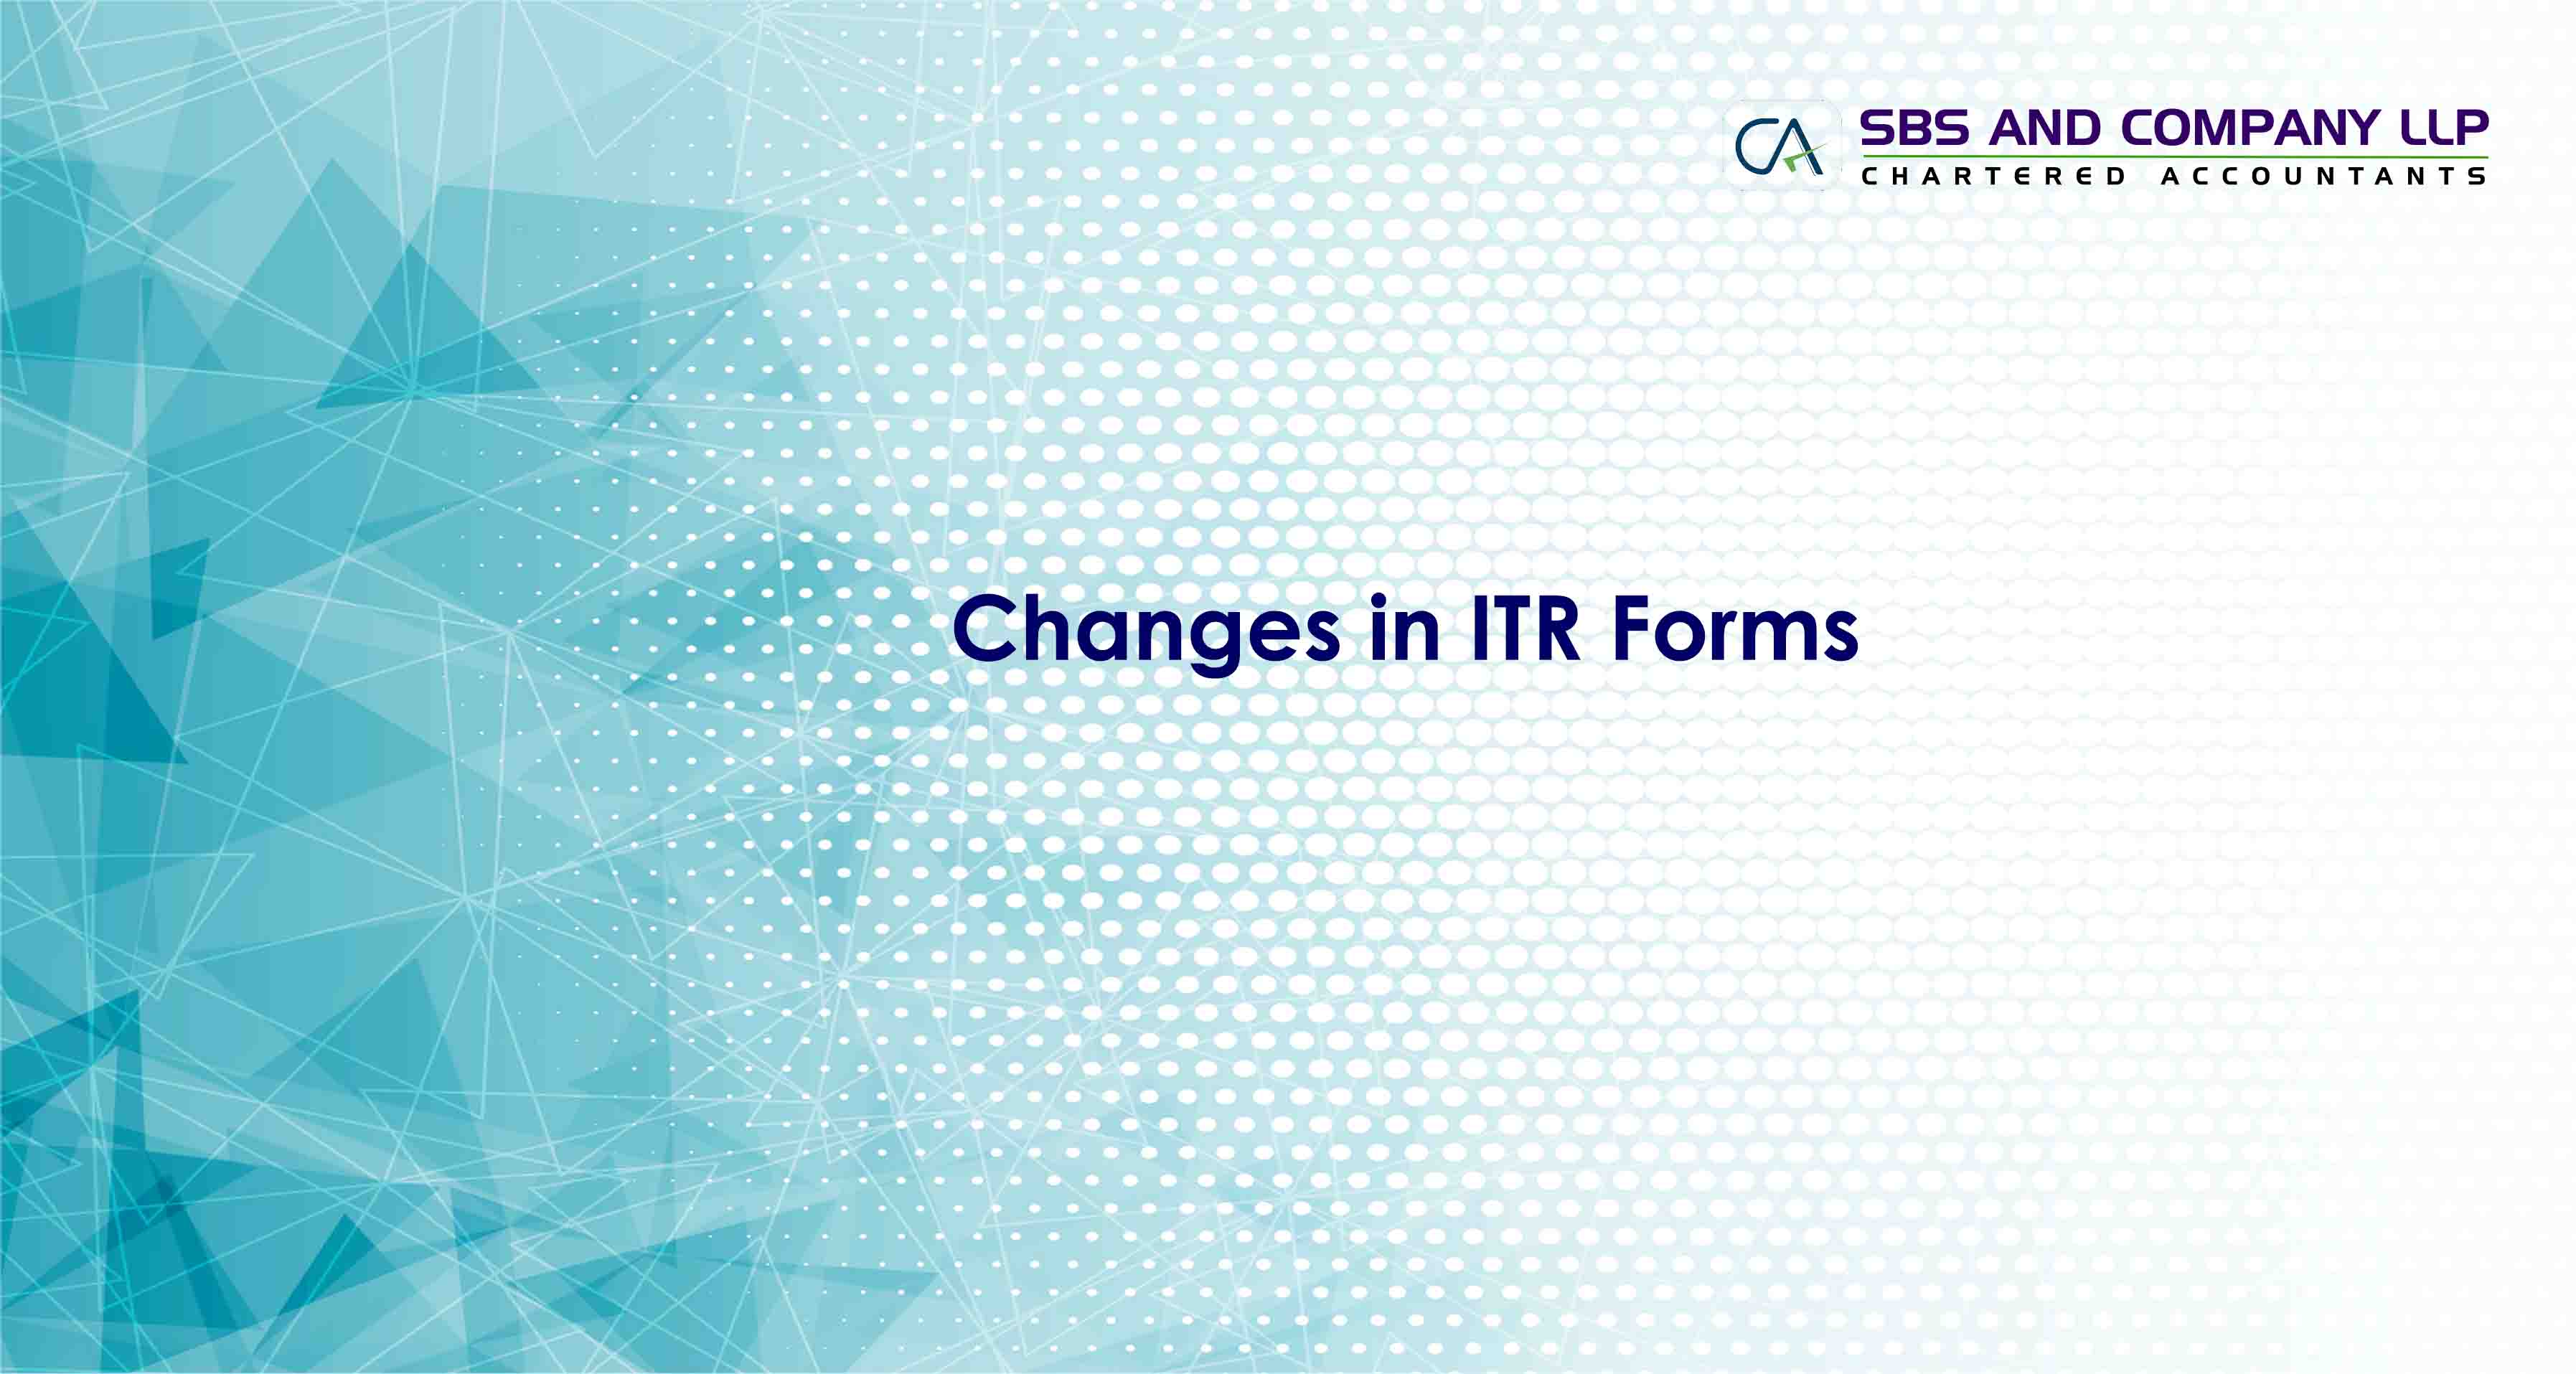 Changes in ITR Forms